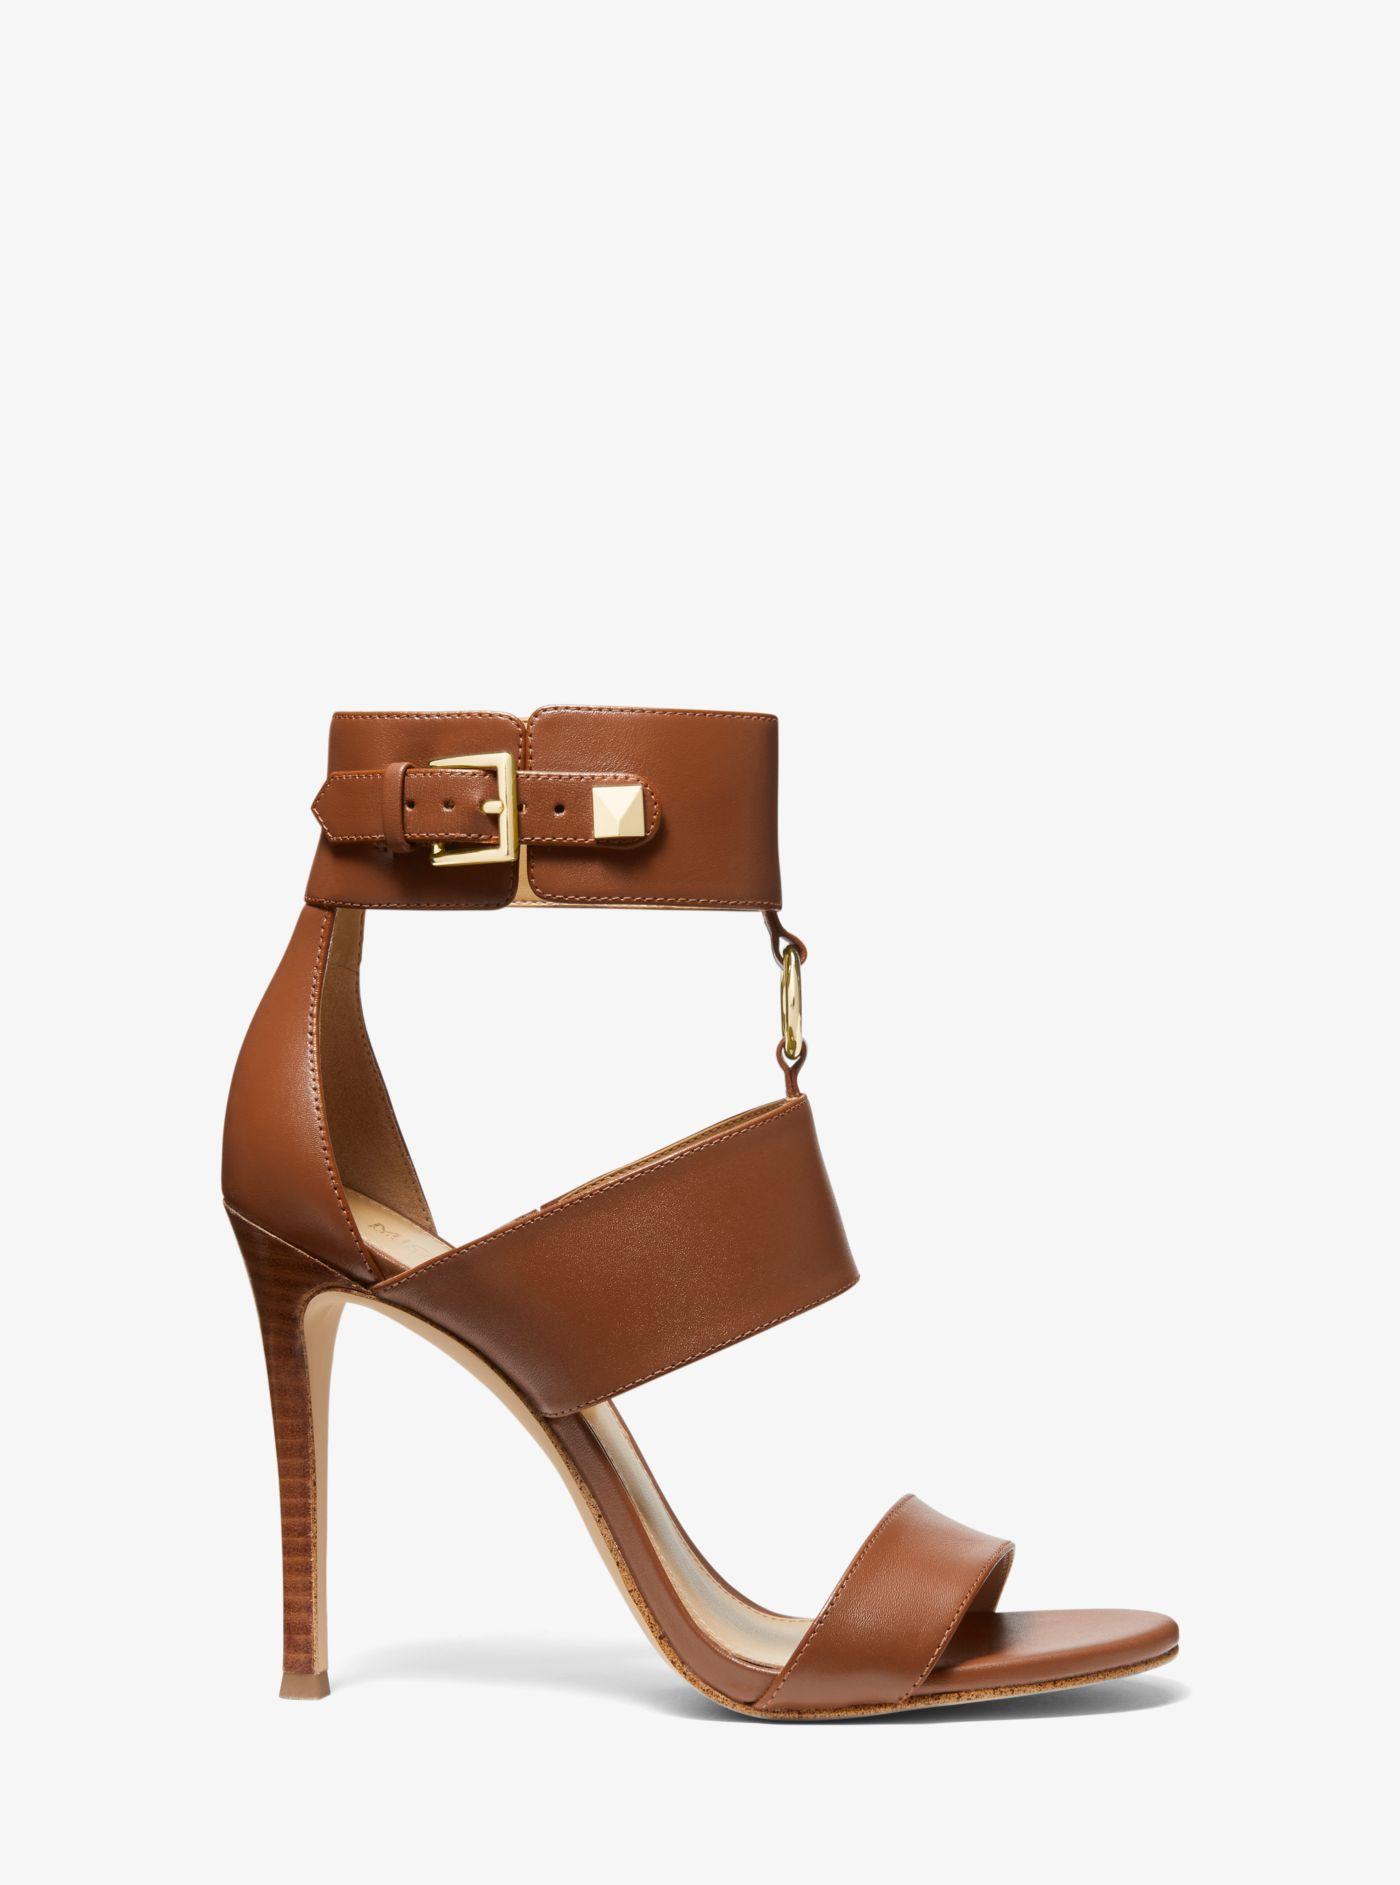 Michael Kors Amos Leather Sandal in Brown | Lyst